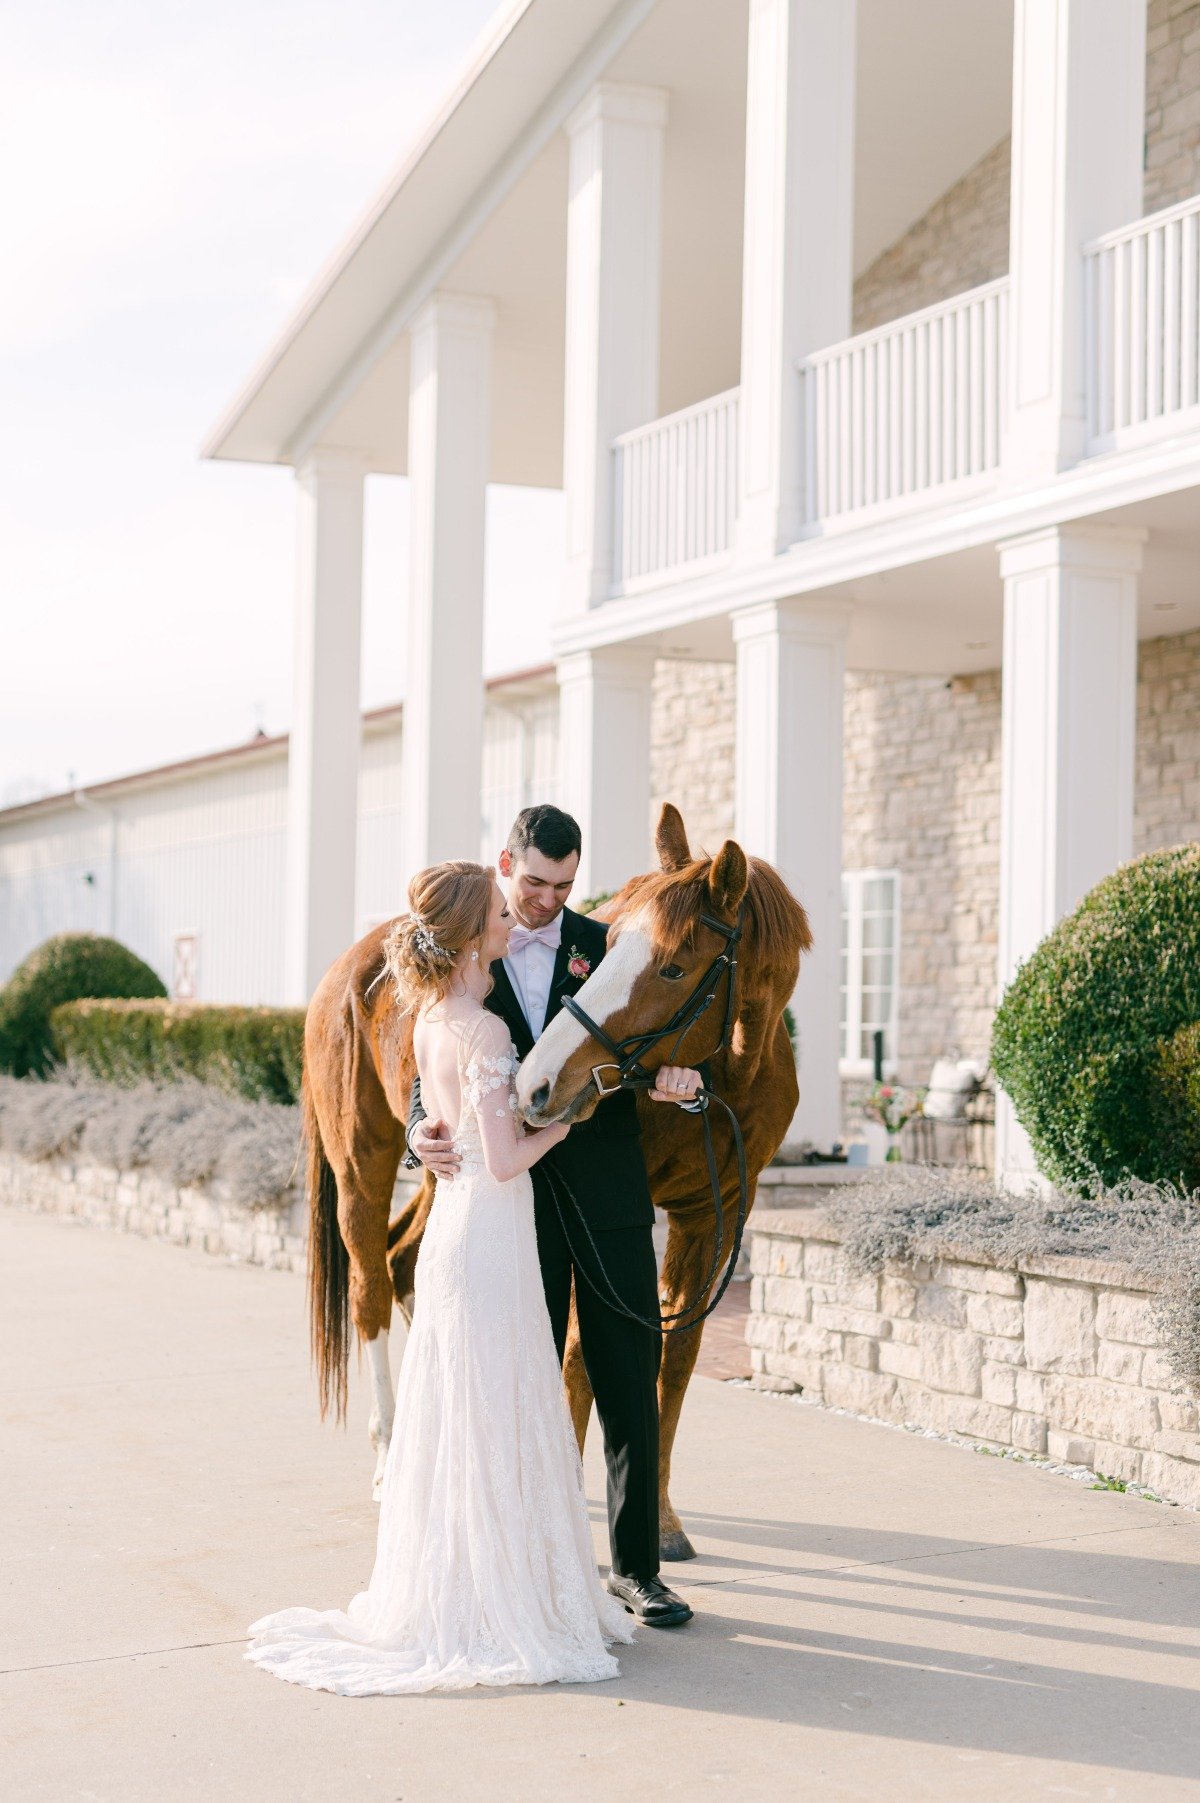 Romantic vintage newlyweds with horse